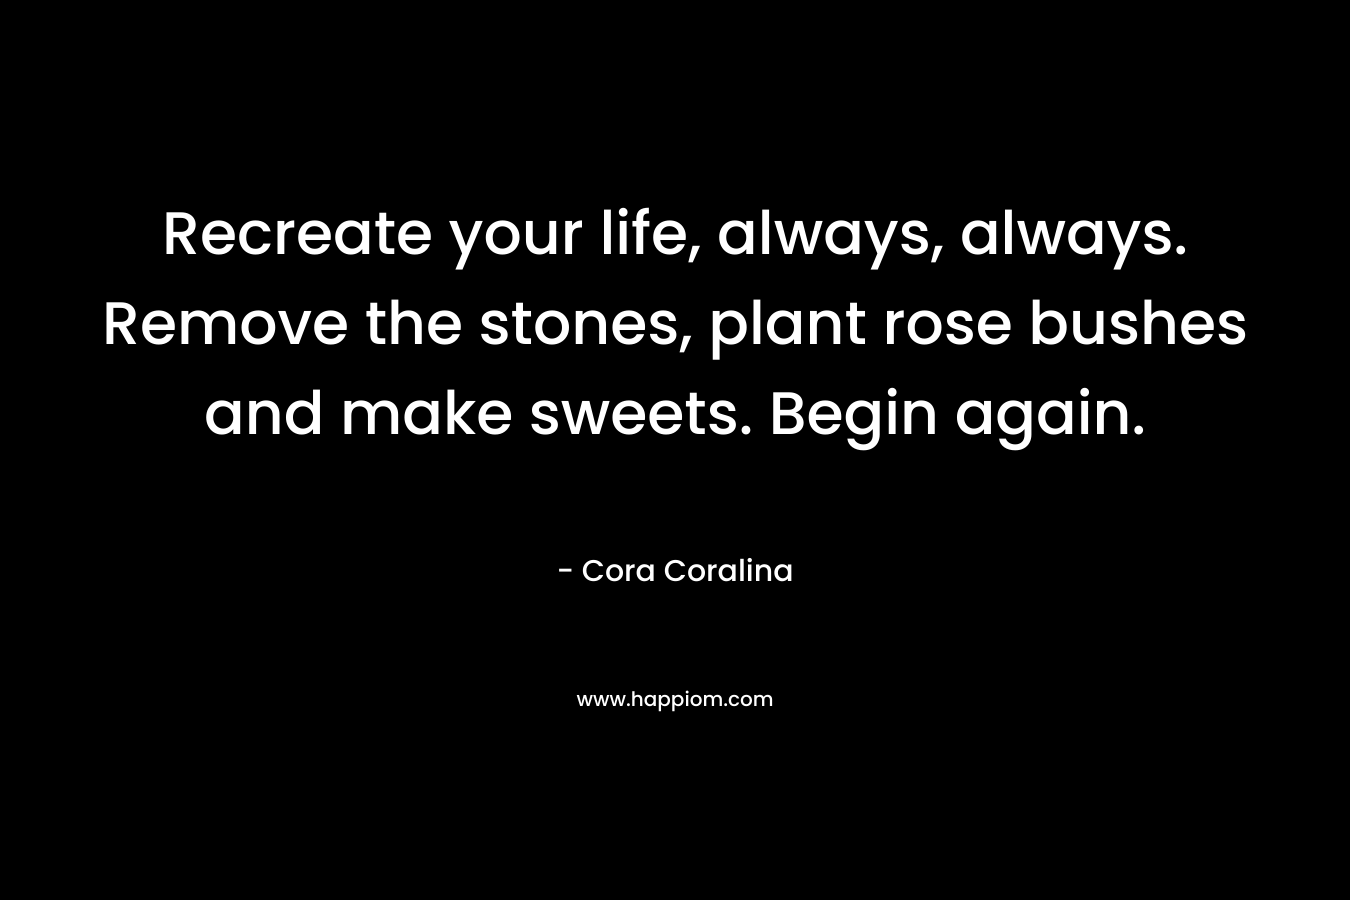 Recreate your life, always, always. Remove the stones, plant rose bushes and make sweets. Begin again. – Cora Coralina